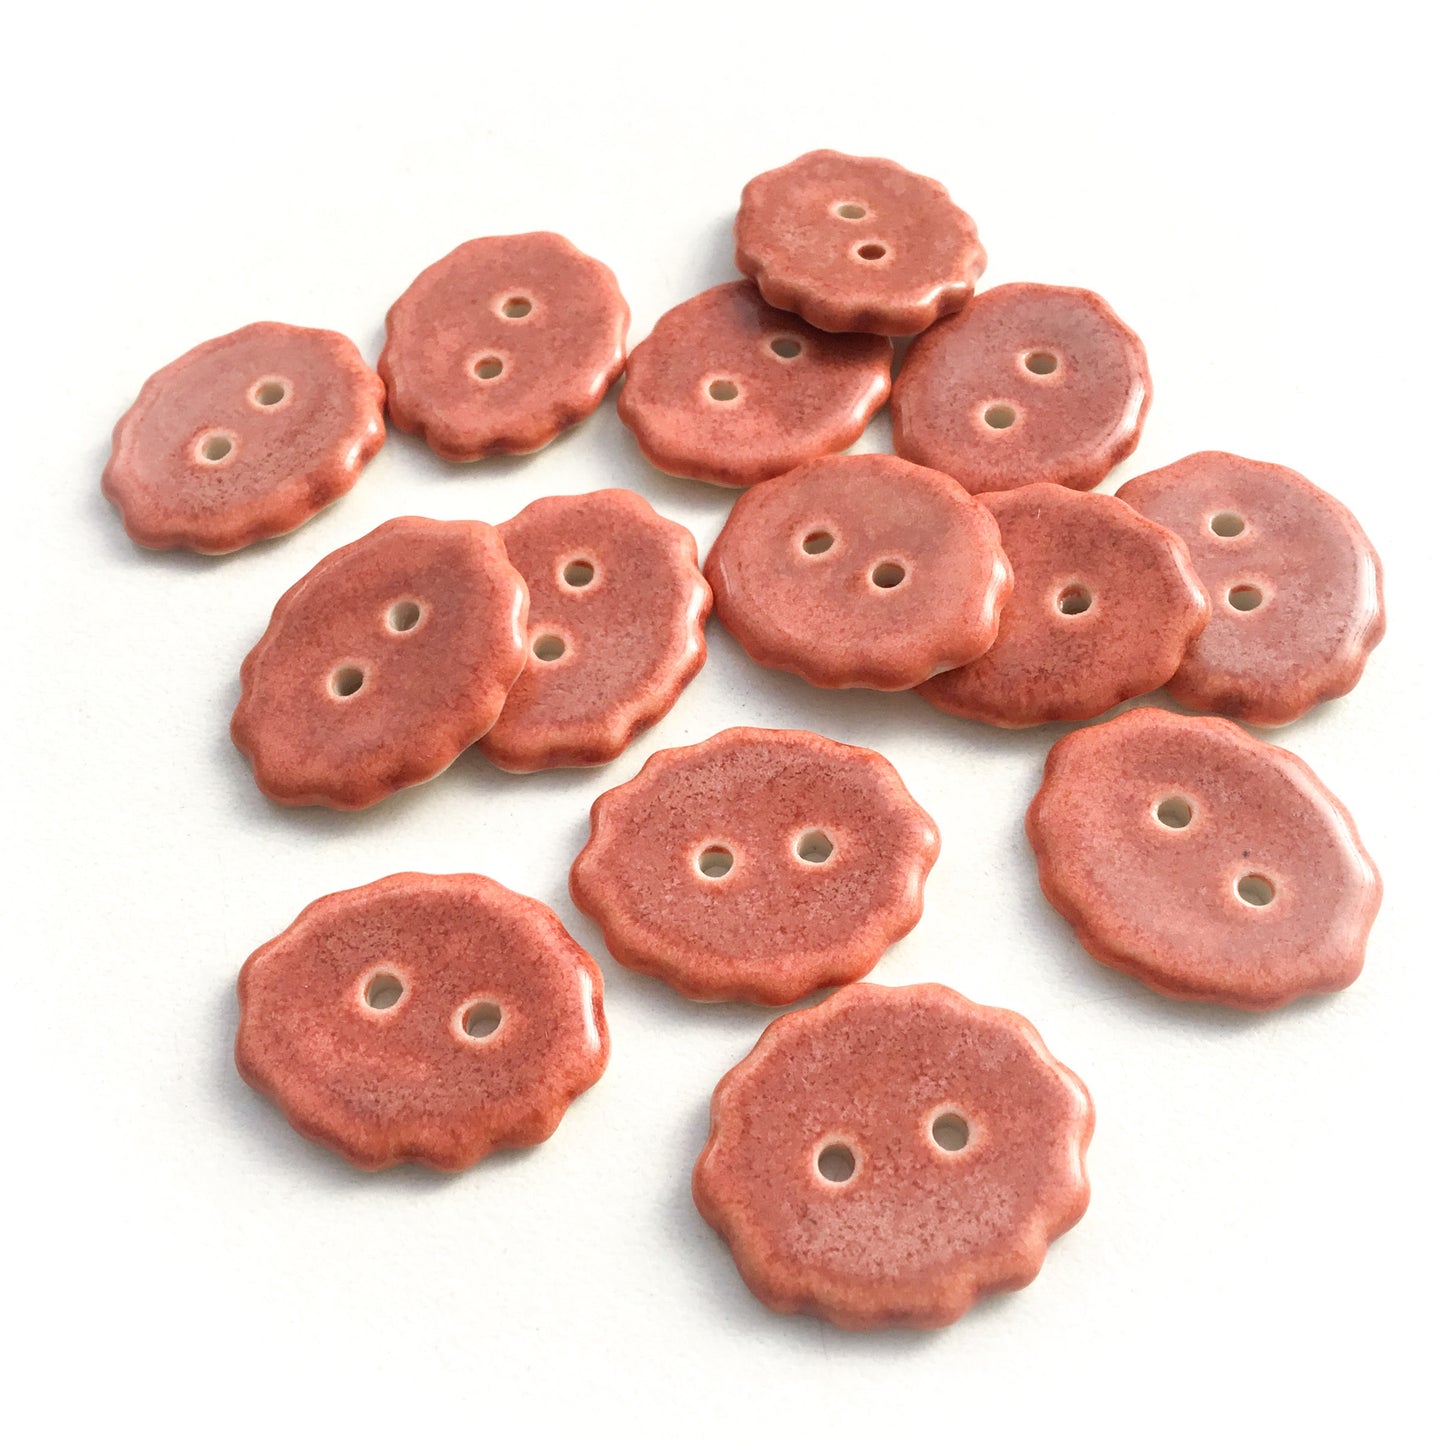 Rusty Pink Scalloped Porcelain Buttons - 3/4" x 7/8"